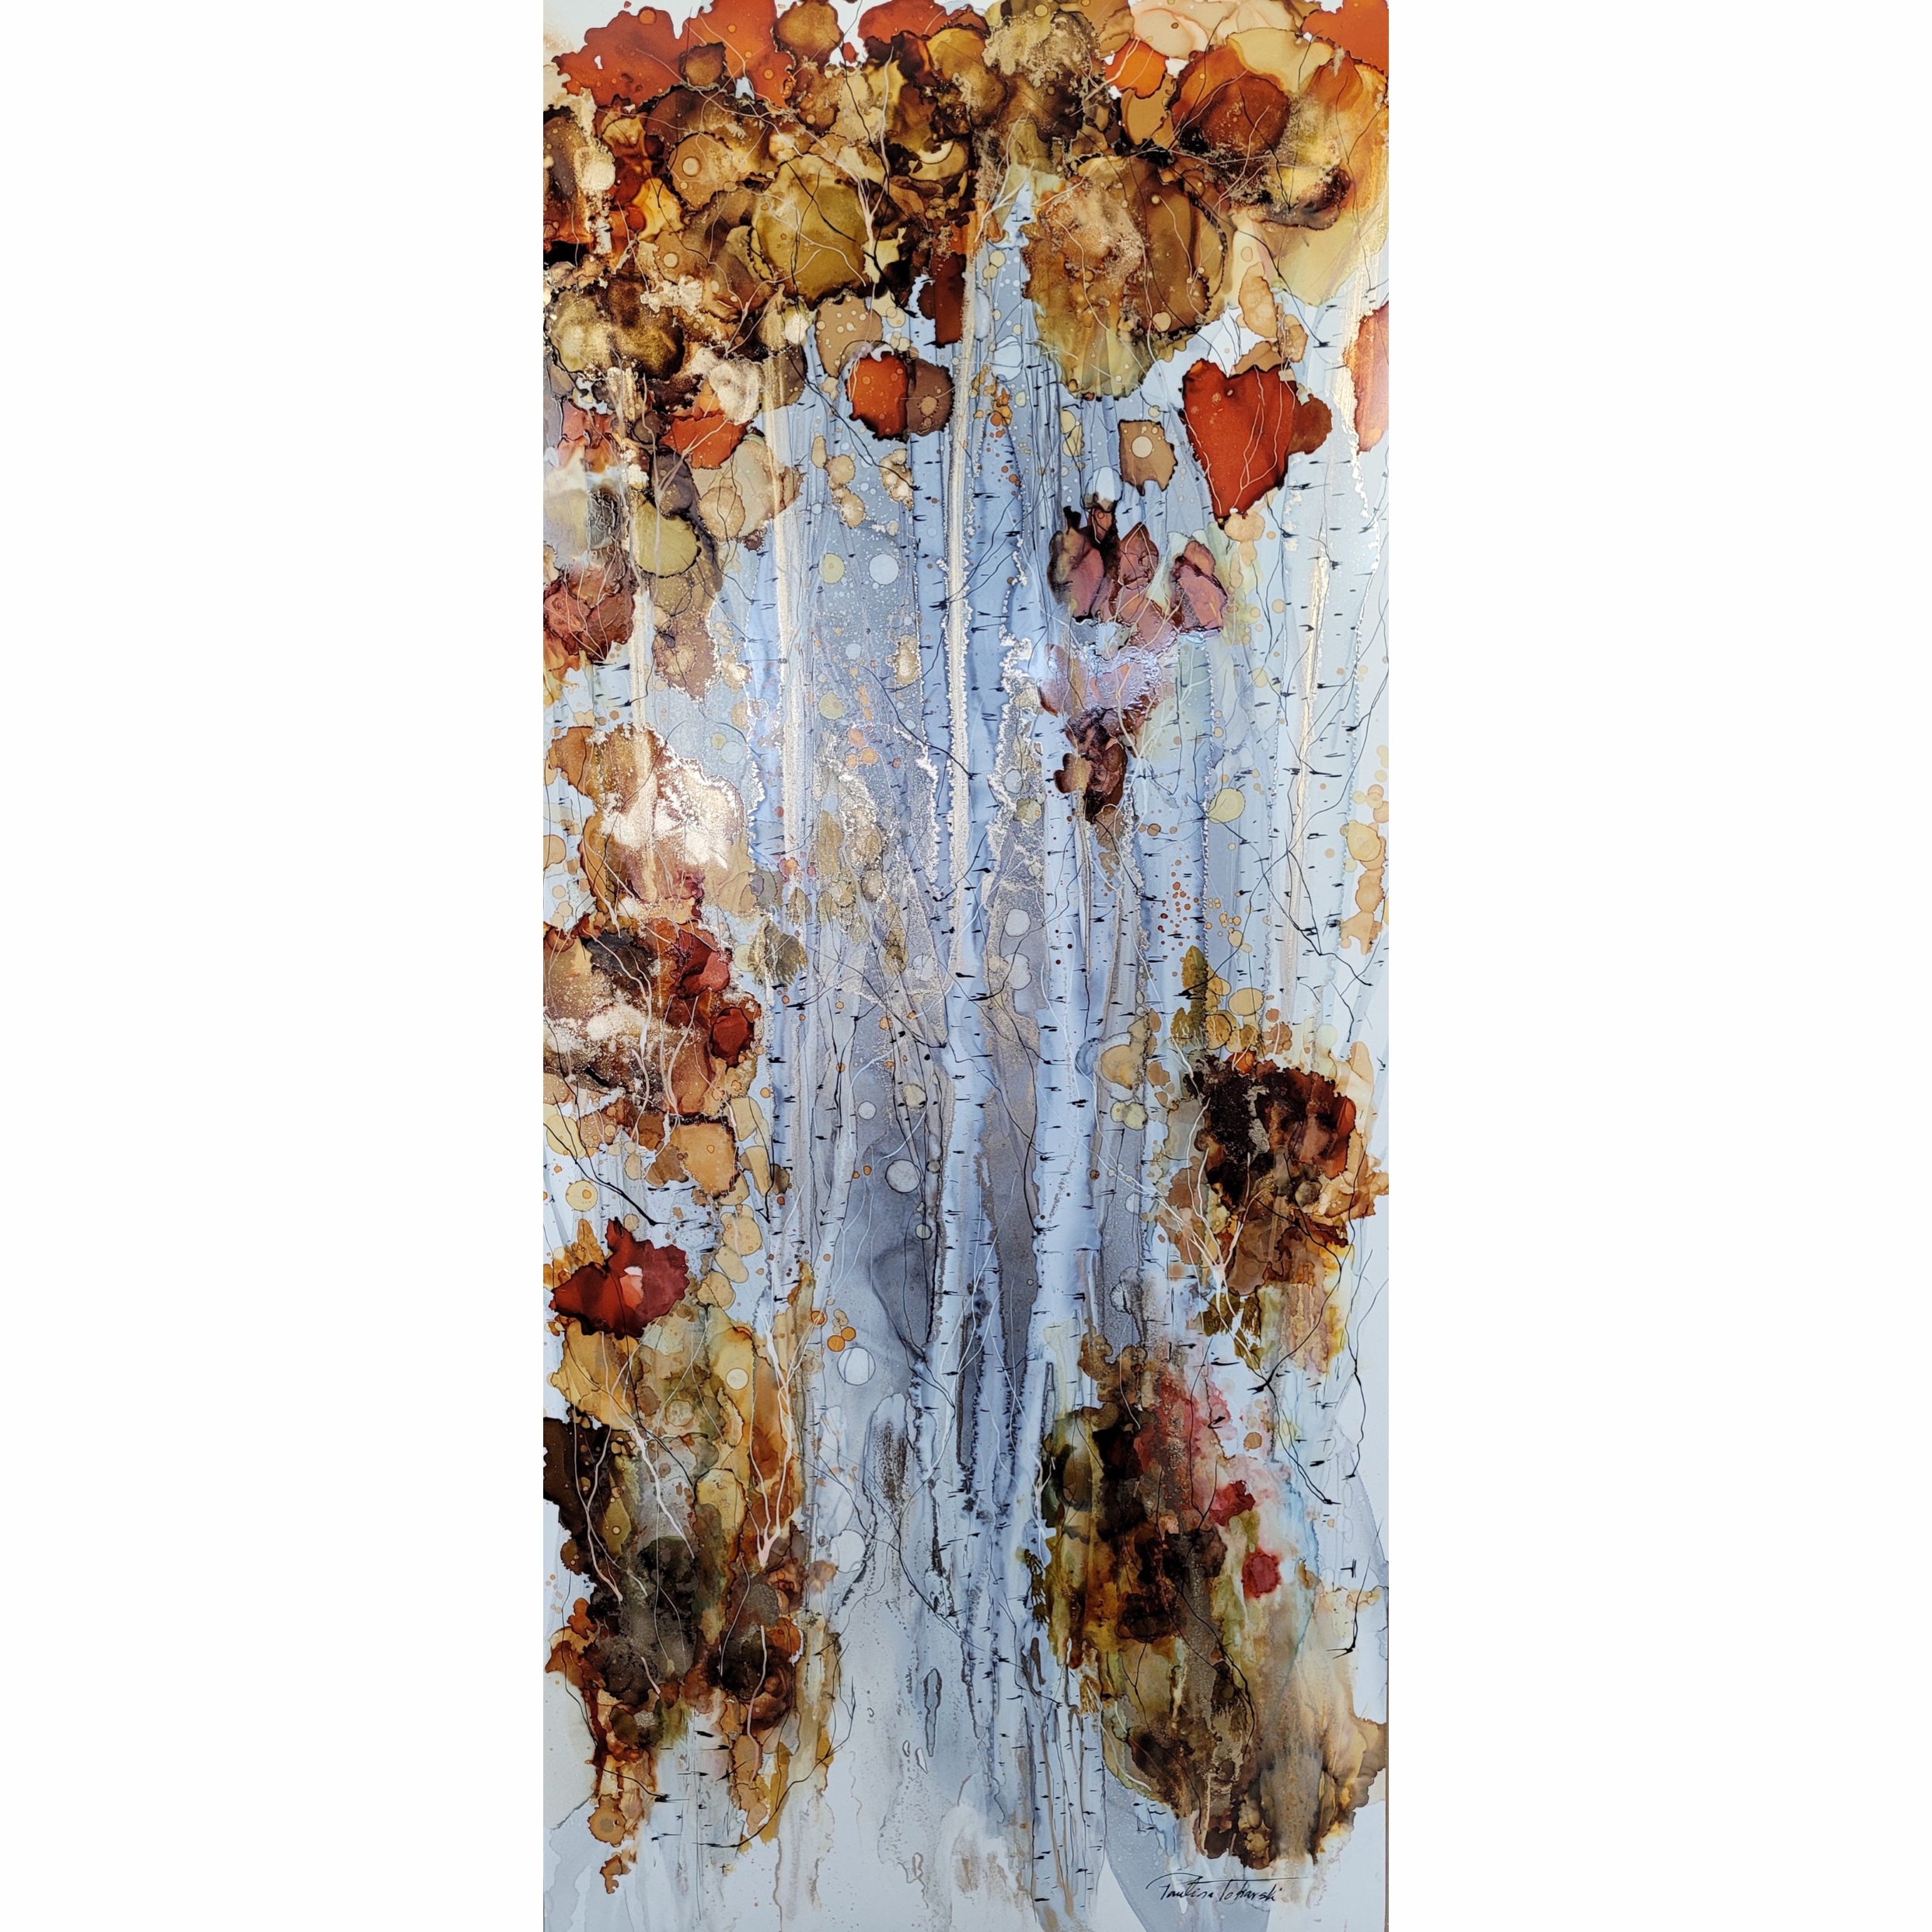 Dreaming of a Blissful Fall 1, Alcohol Ink Treescape by Paulina Tokarski | Effusion Art Gallery + Cast Glass Studio, Invermere BC